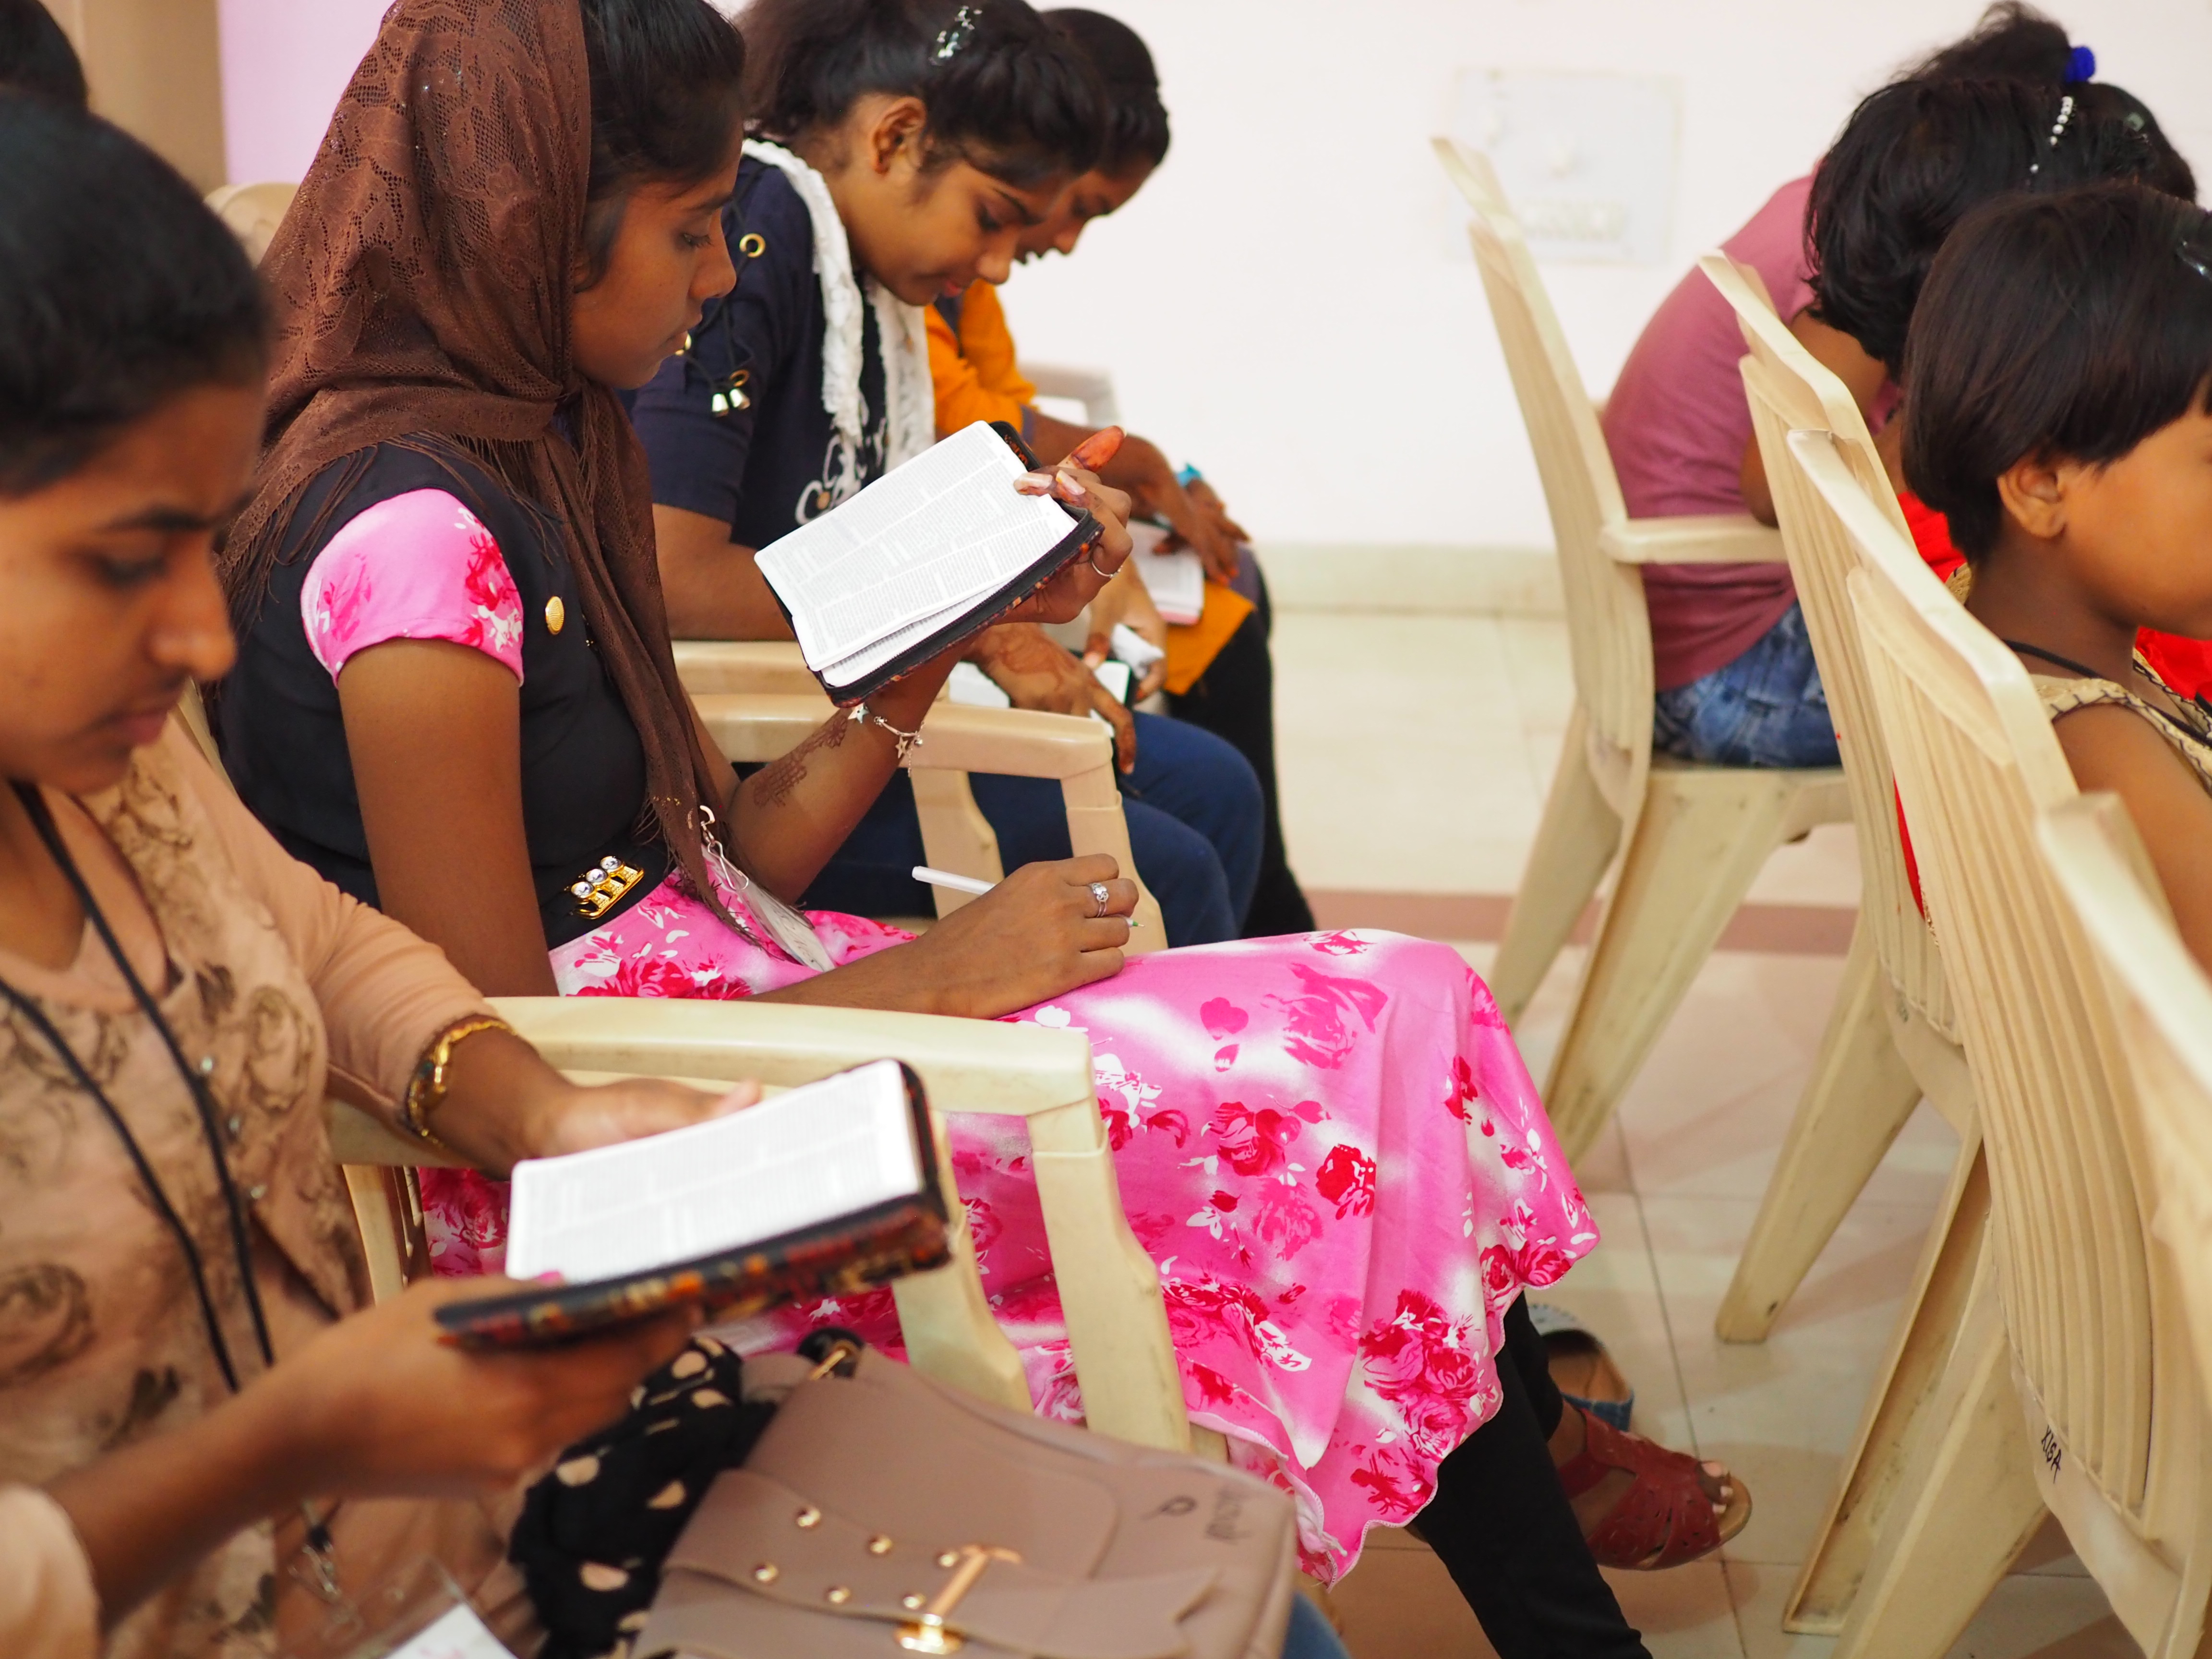 Our youth and children in South Asia studying God's Word.